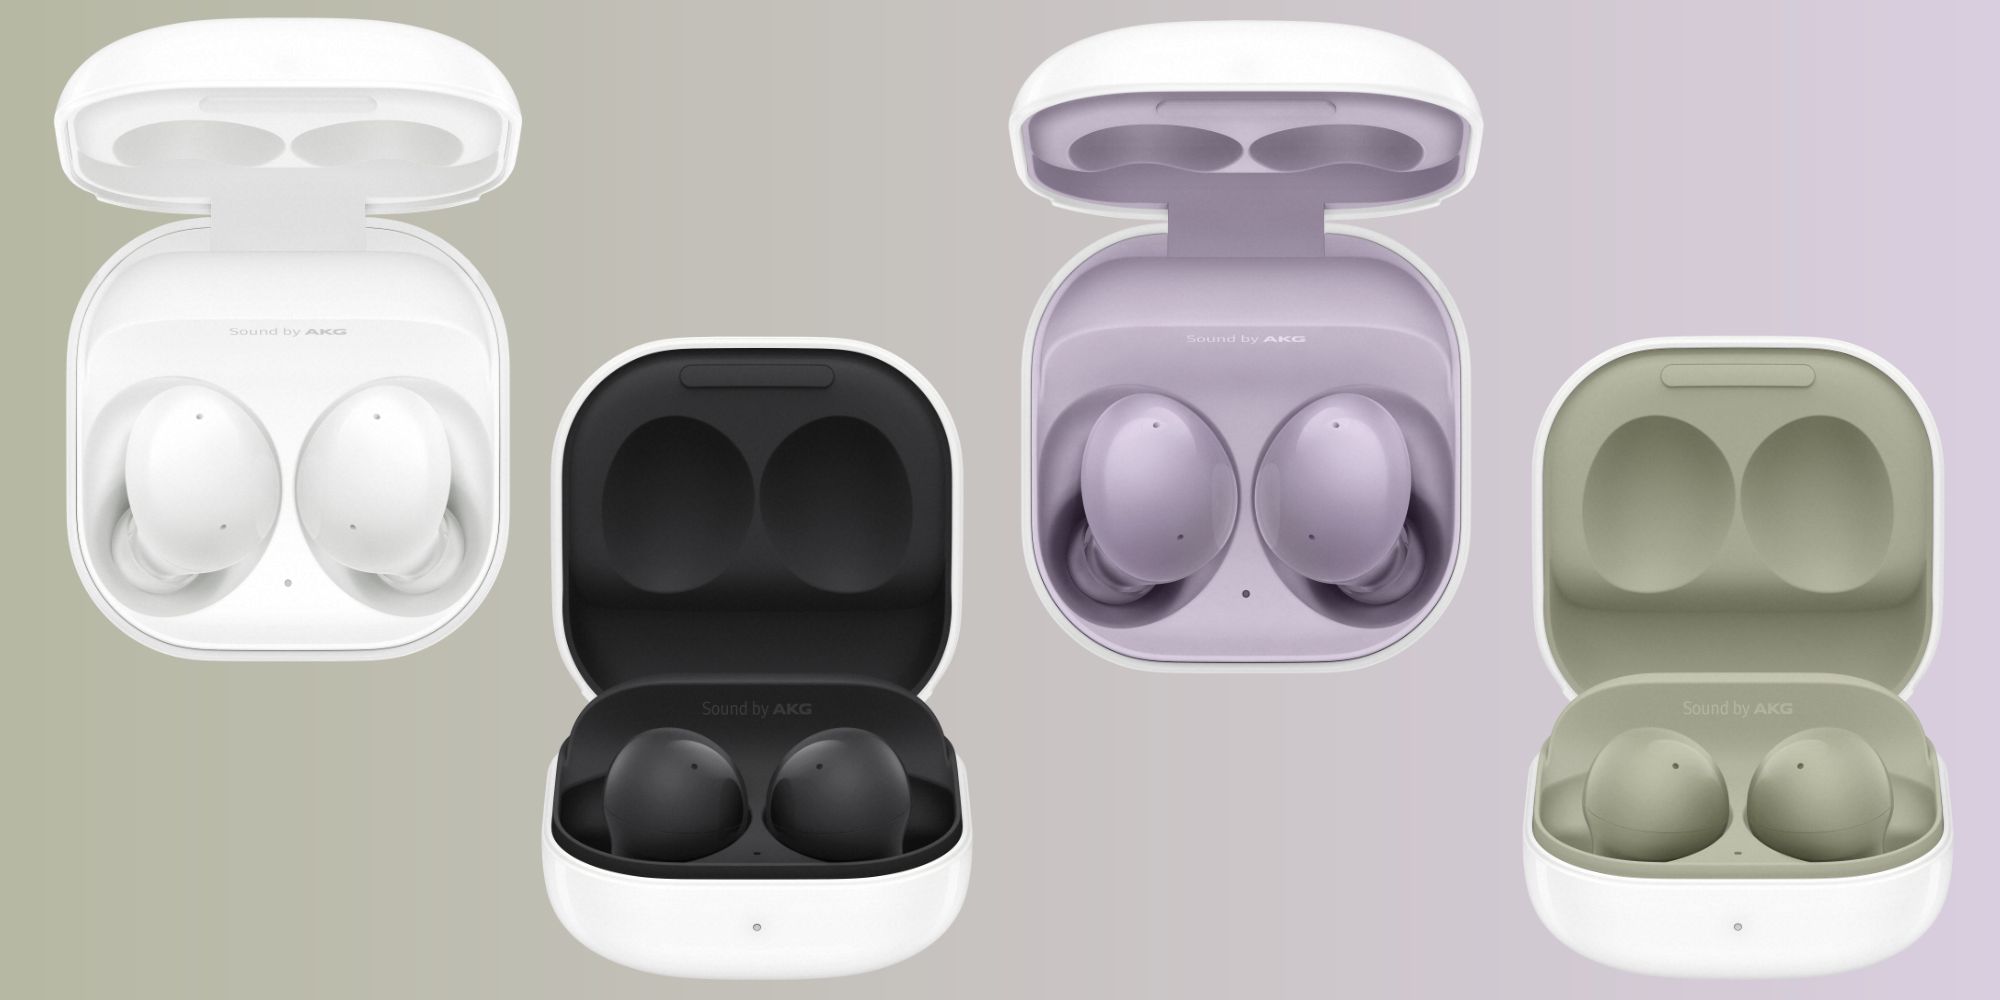 Samsung Galaxy Buds 2 in white, black, lavender, and olive